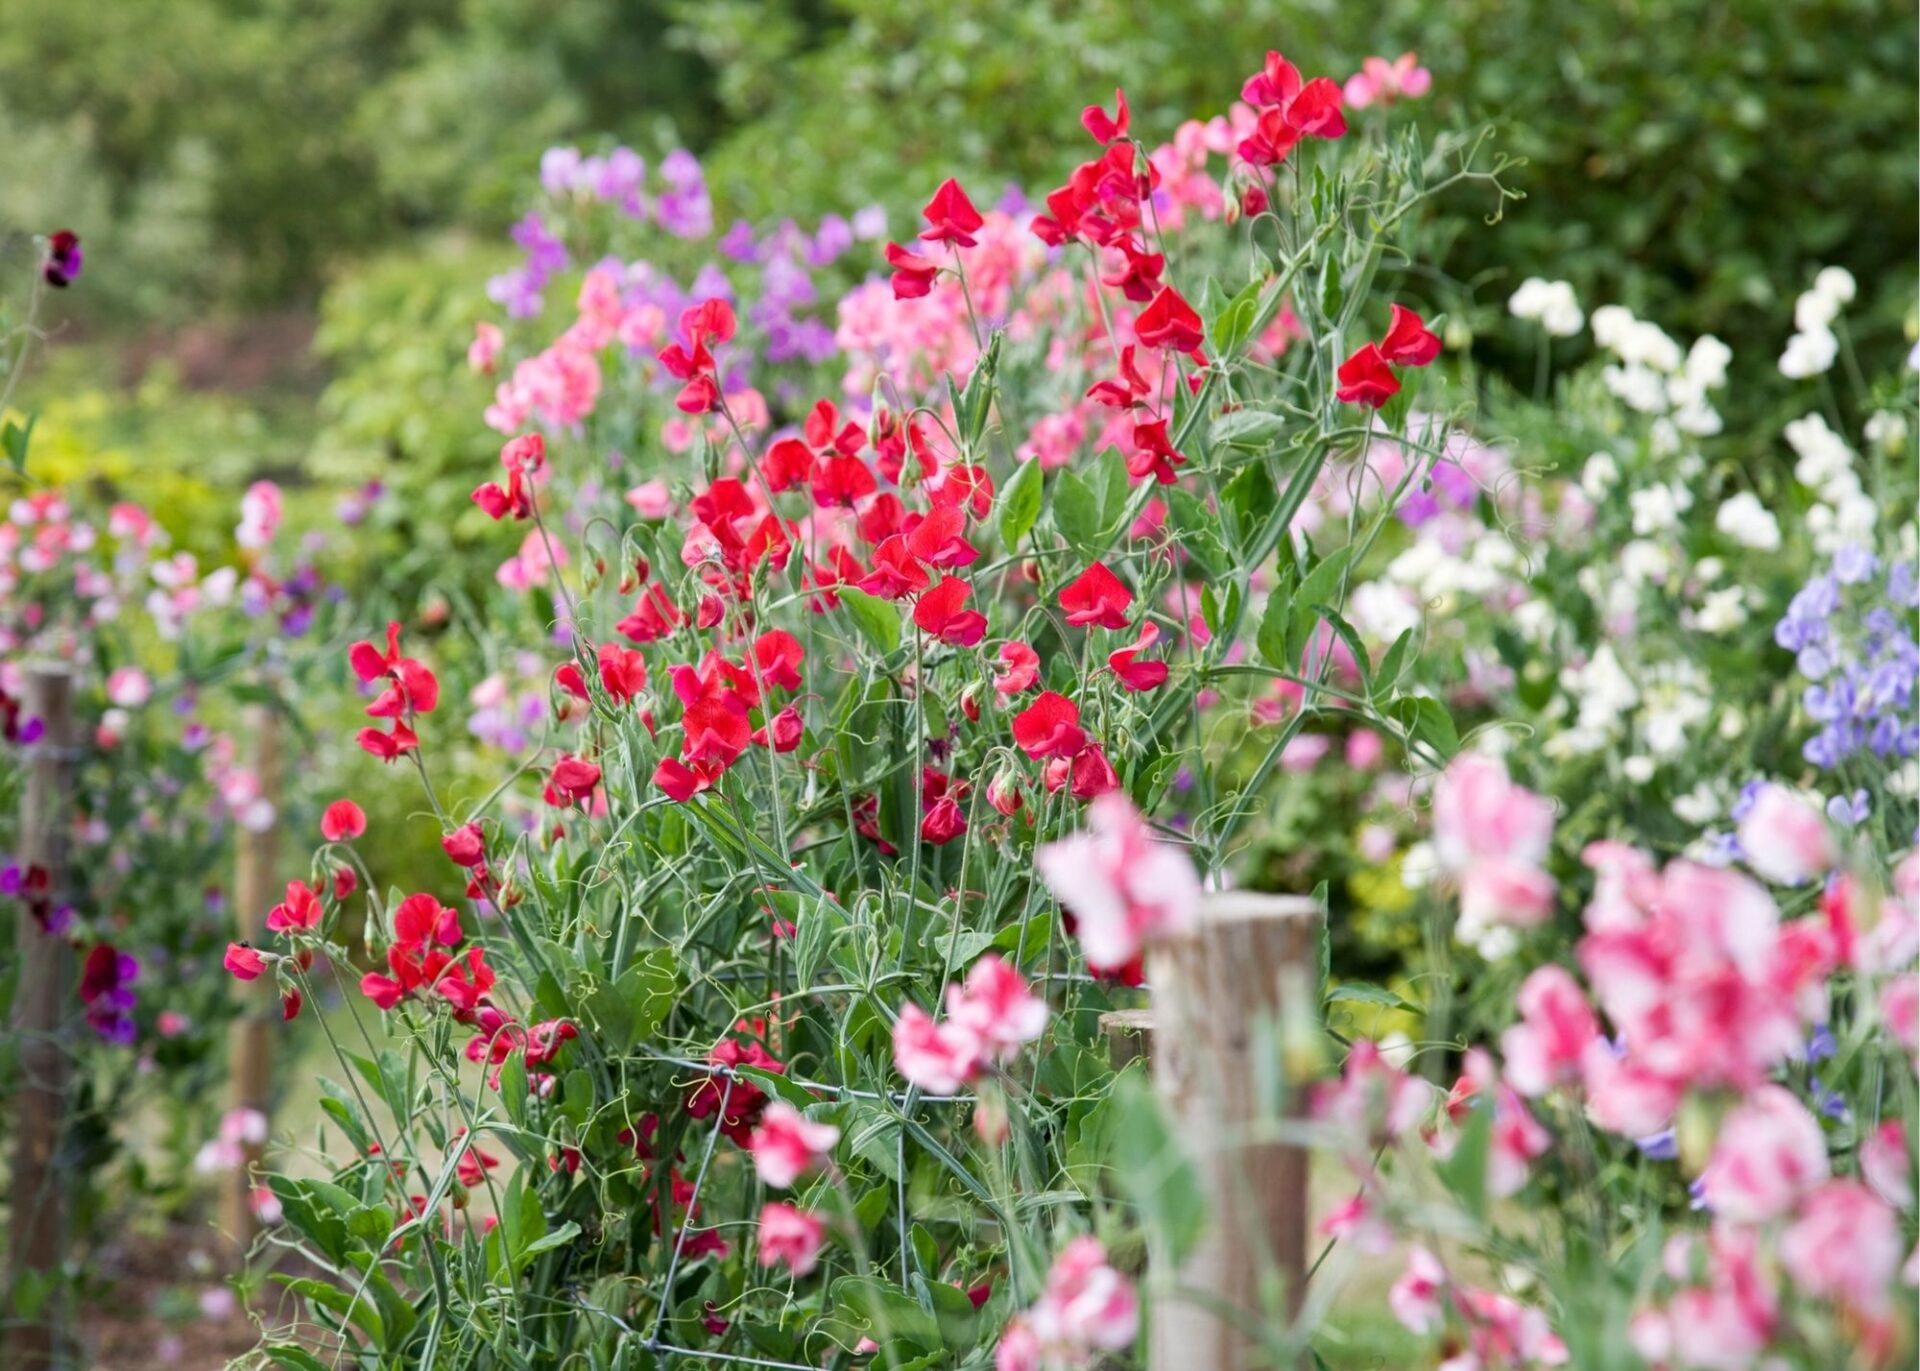 How to grow sweet pea flowers from seed